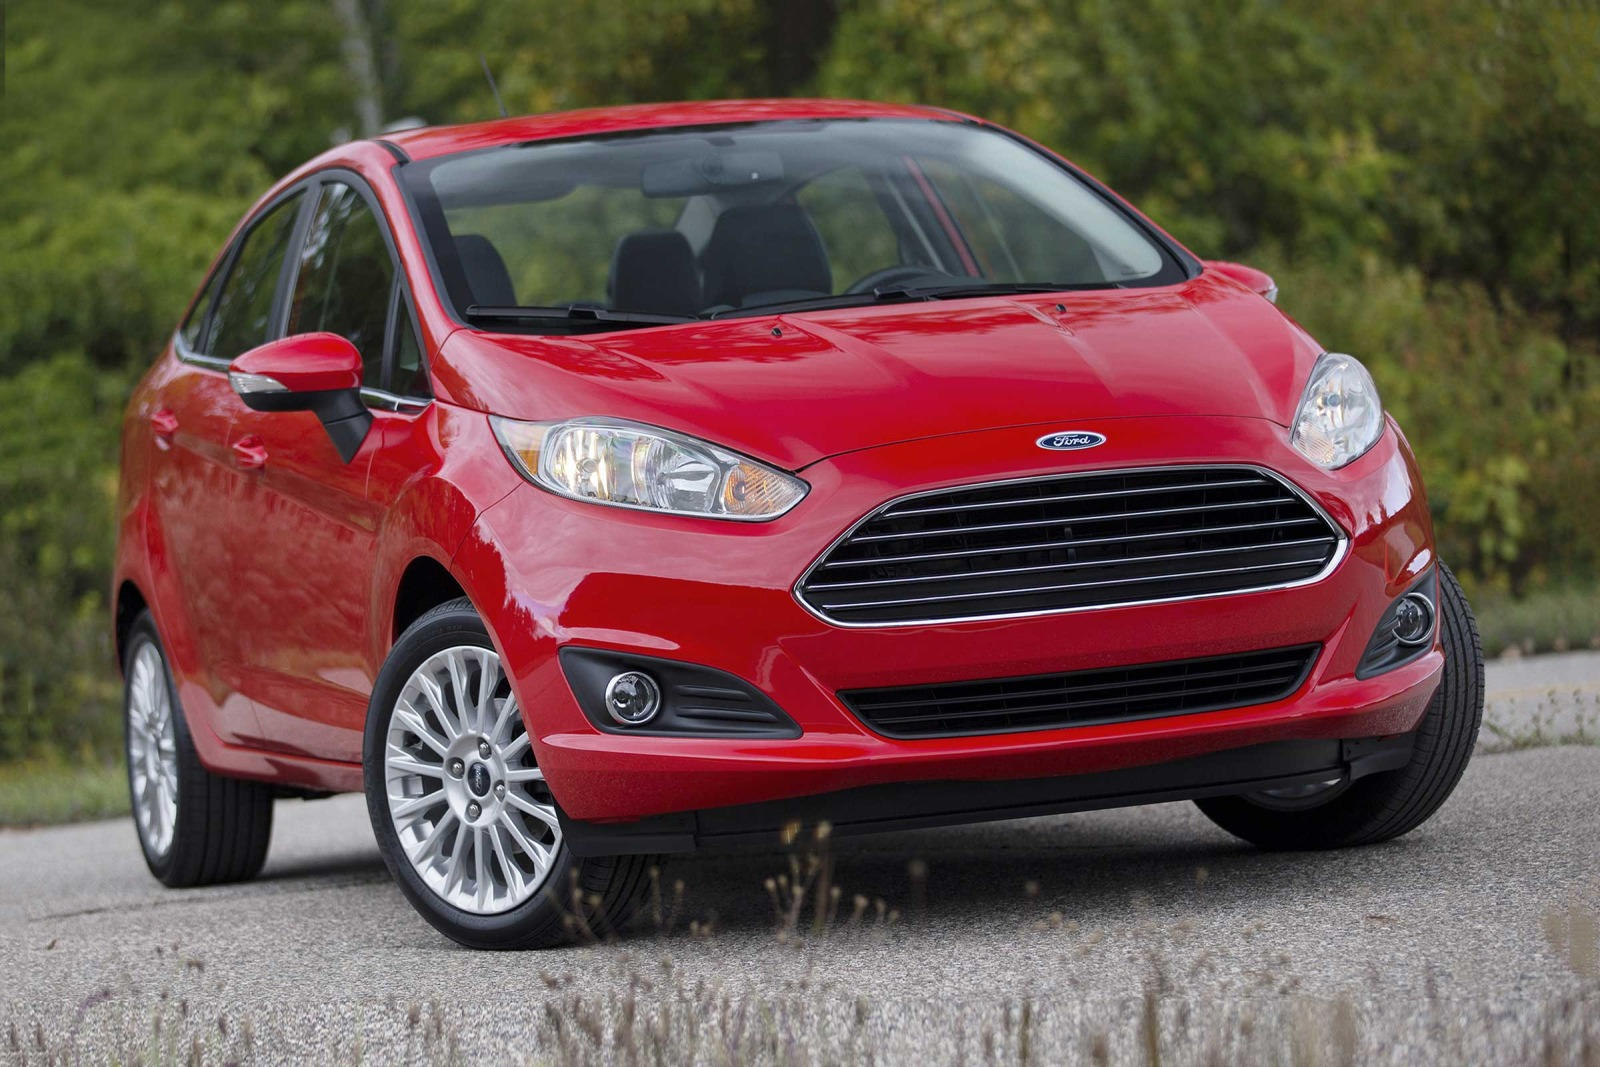 Ford Fiesta Review, For Sale, Interior, Models & News in Australia